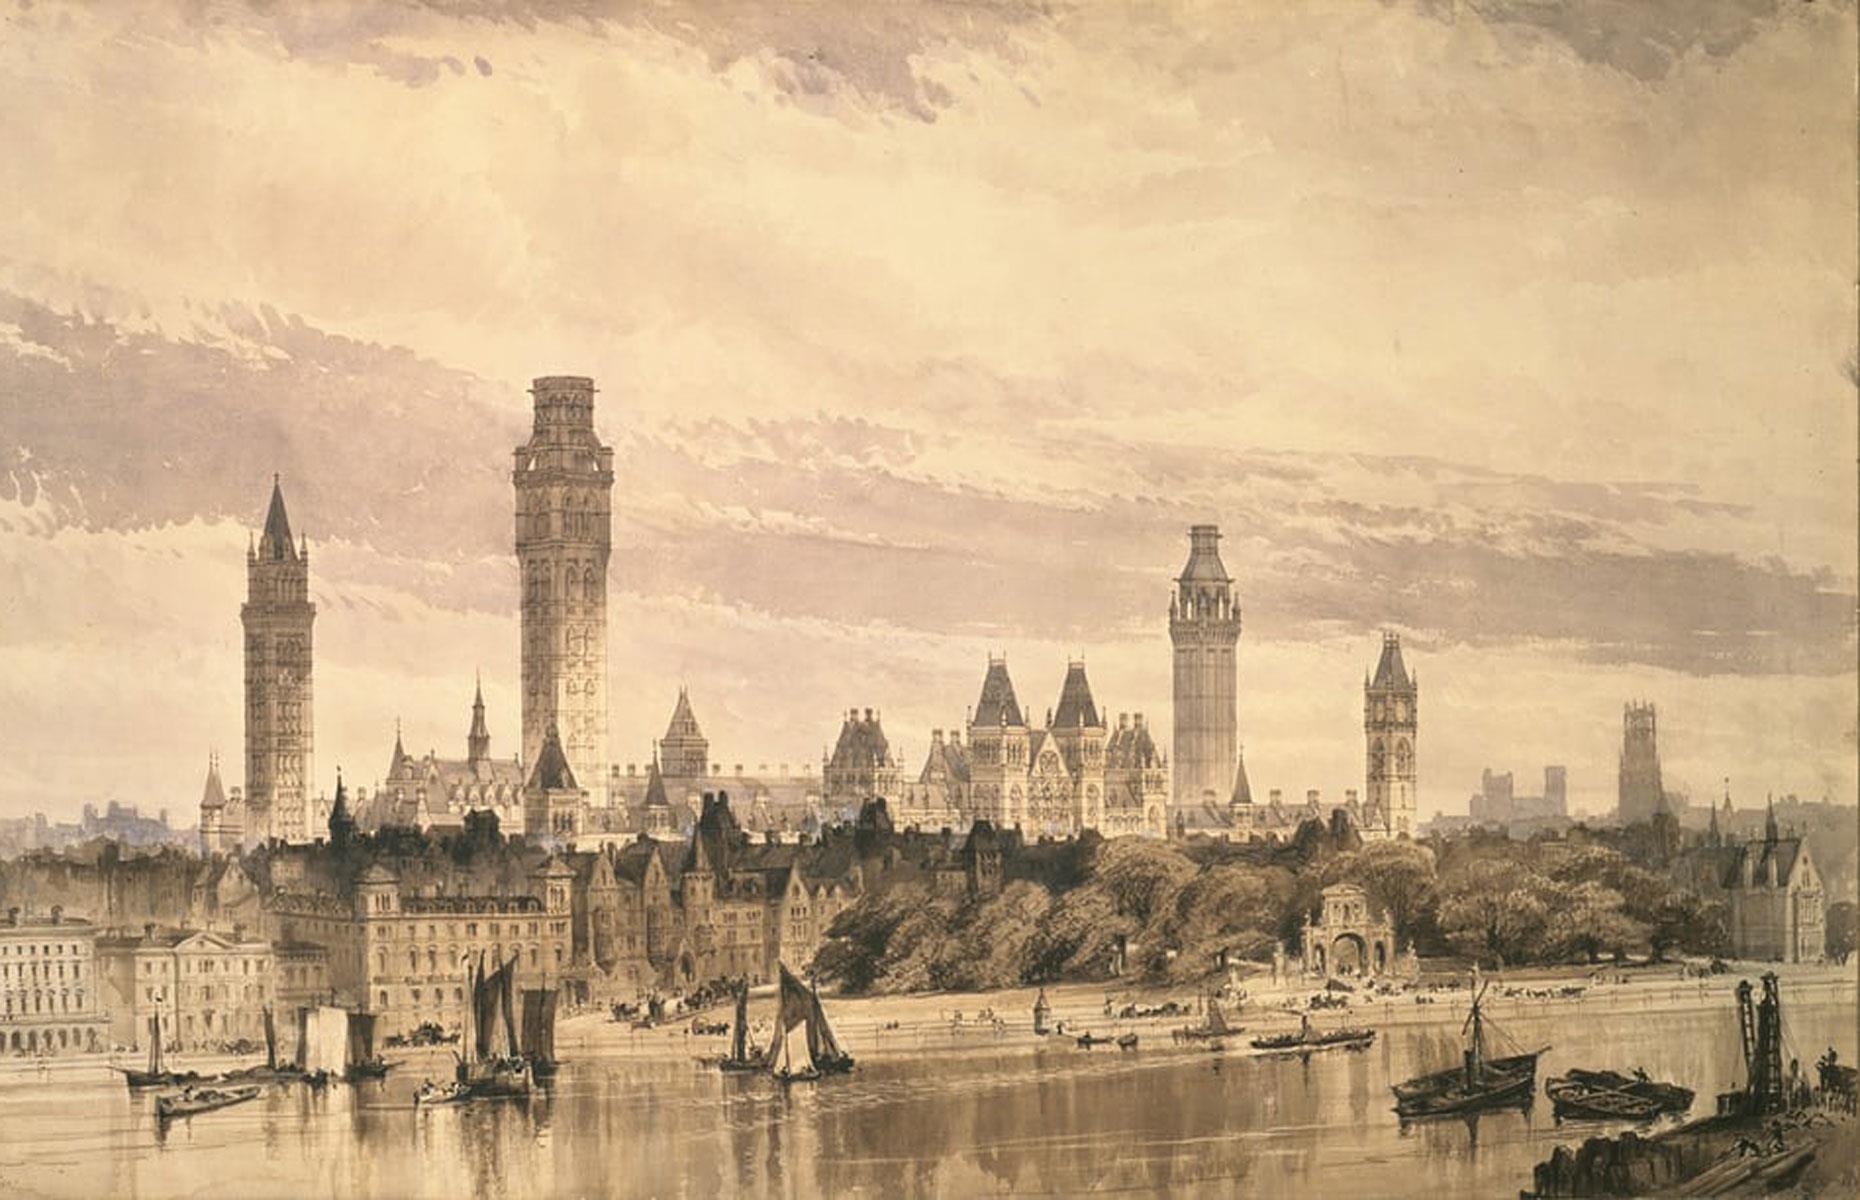 Street beat 11 architects to win the competition to design the building, including fellow Gothic Revival exponent Alfred Waterhouse. He proposed an even grander edifice with several tall towers, elements of which survive in his masterpiece, London's Natural History Museum.